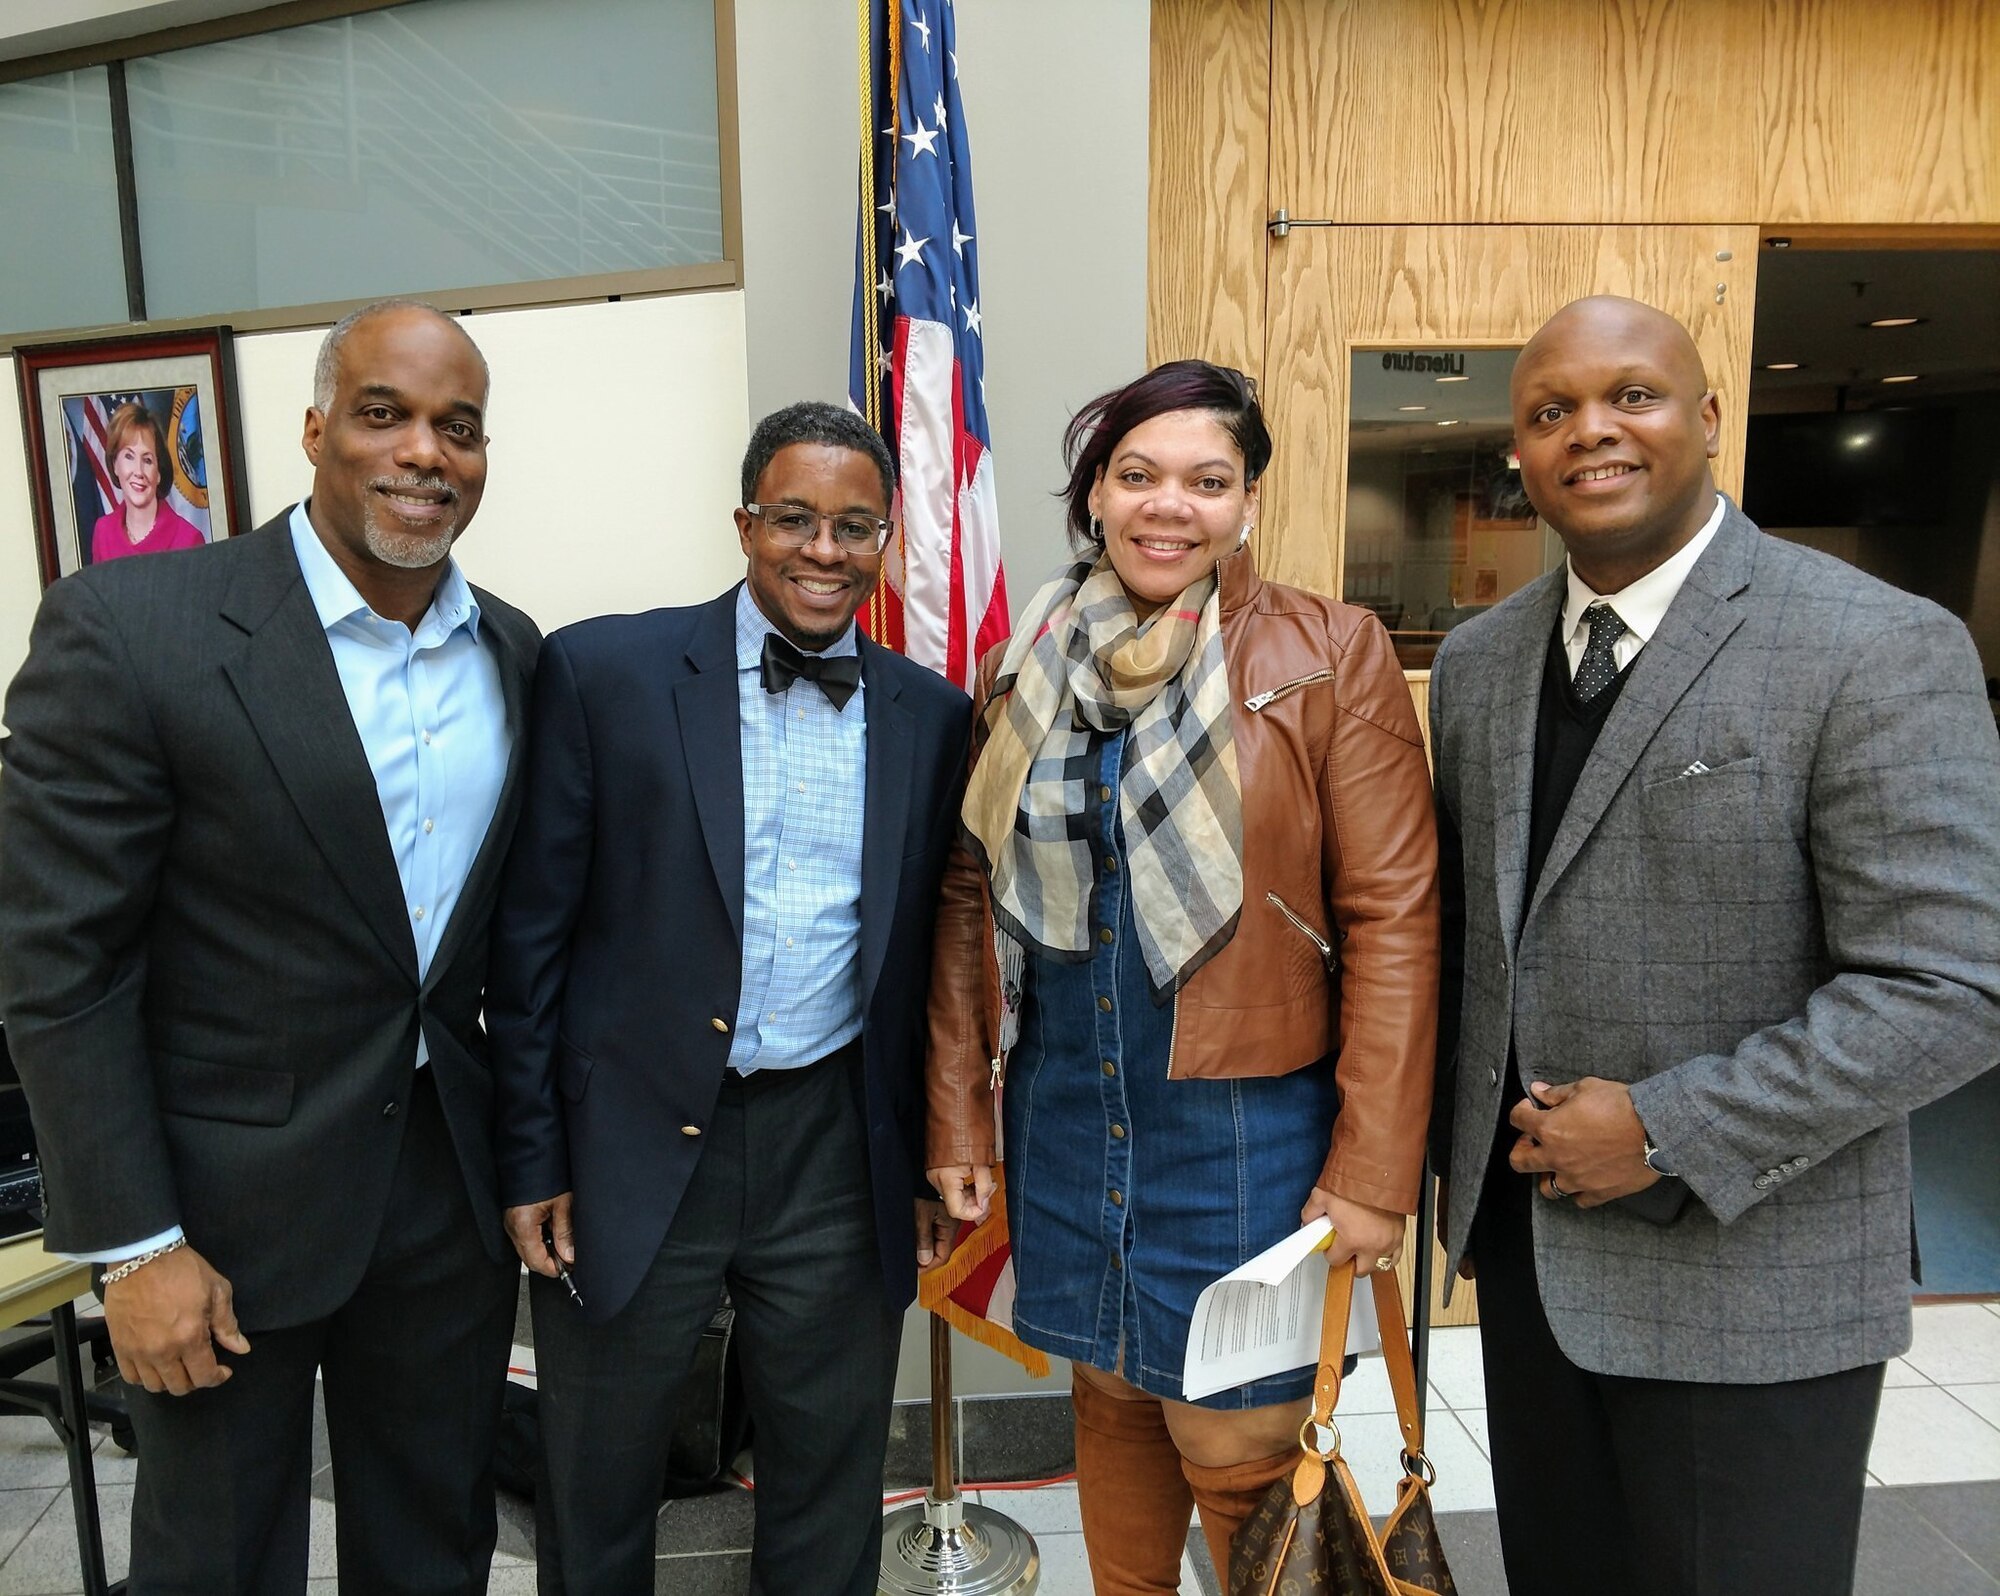 (Right) Master Sgt. Robert Perry, 175th Force Support Squadron training manager, stands next to members of the Prince William County NAACP, Economic Development Committee Mar. 23, 2019, during the annual Financial Literacy Symposium in Woodbridge, Va.